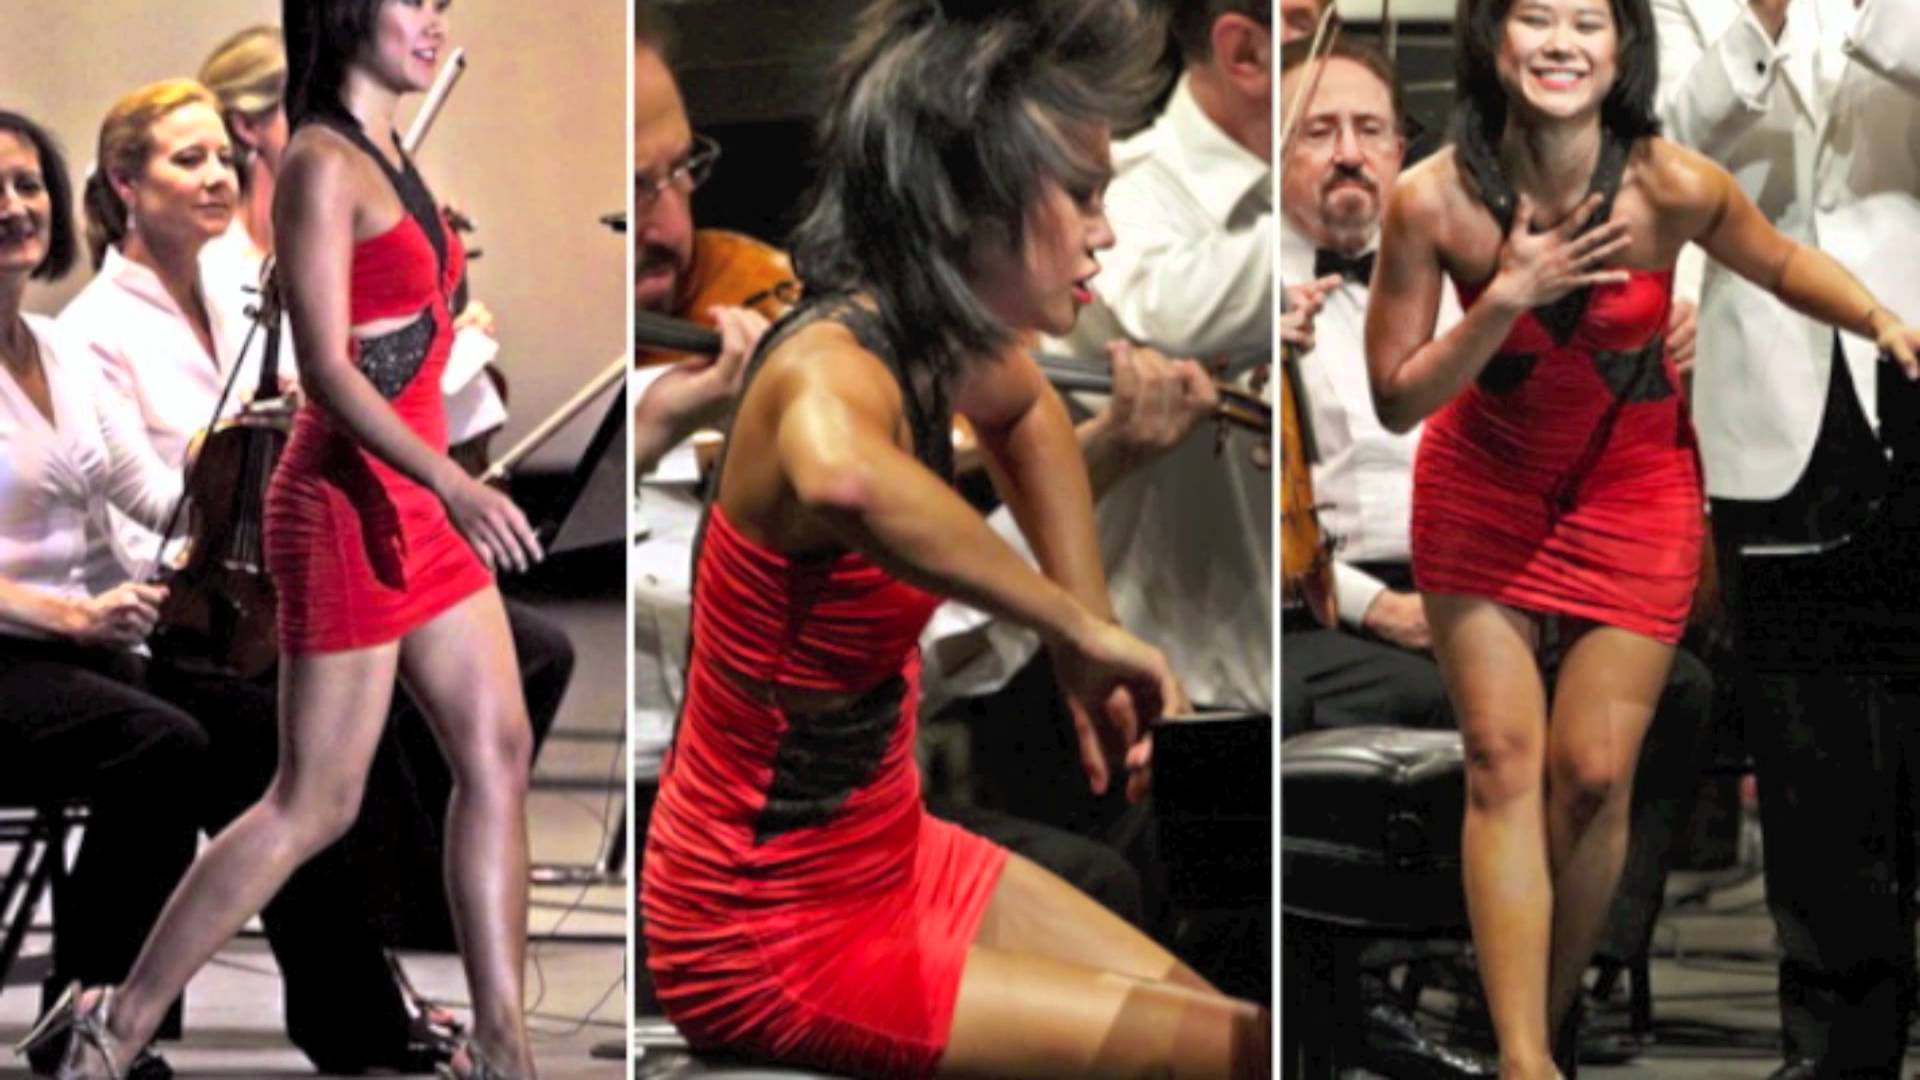 Yuja Wang: 'If I’m going to get naked with my music, I may as well be